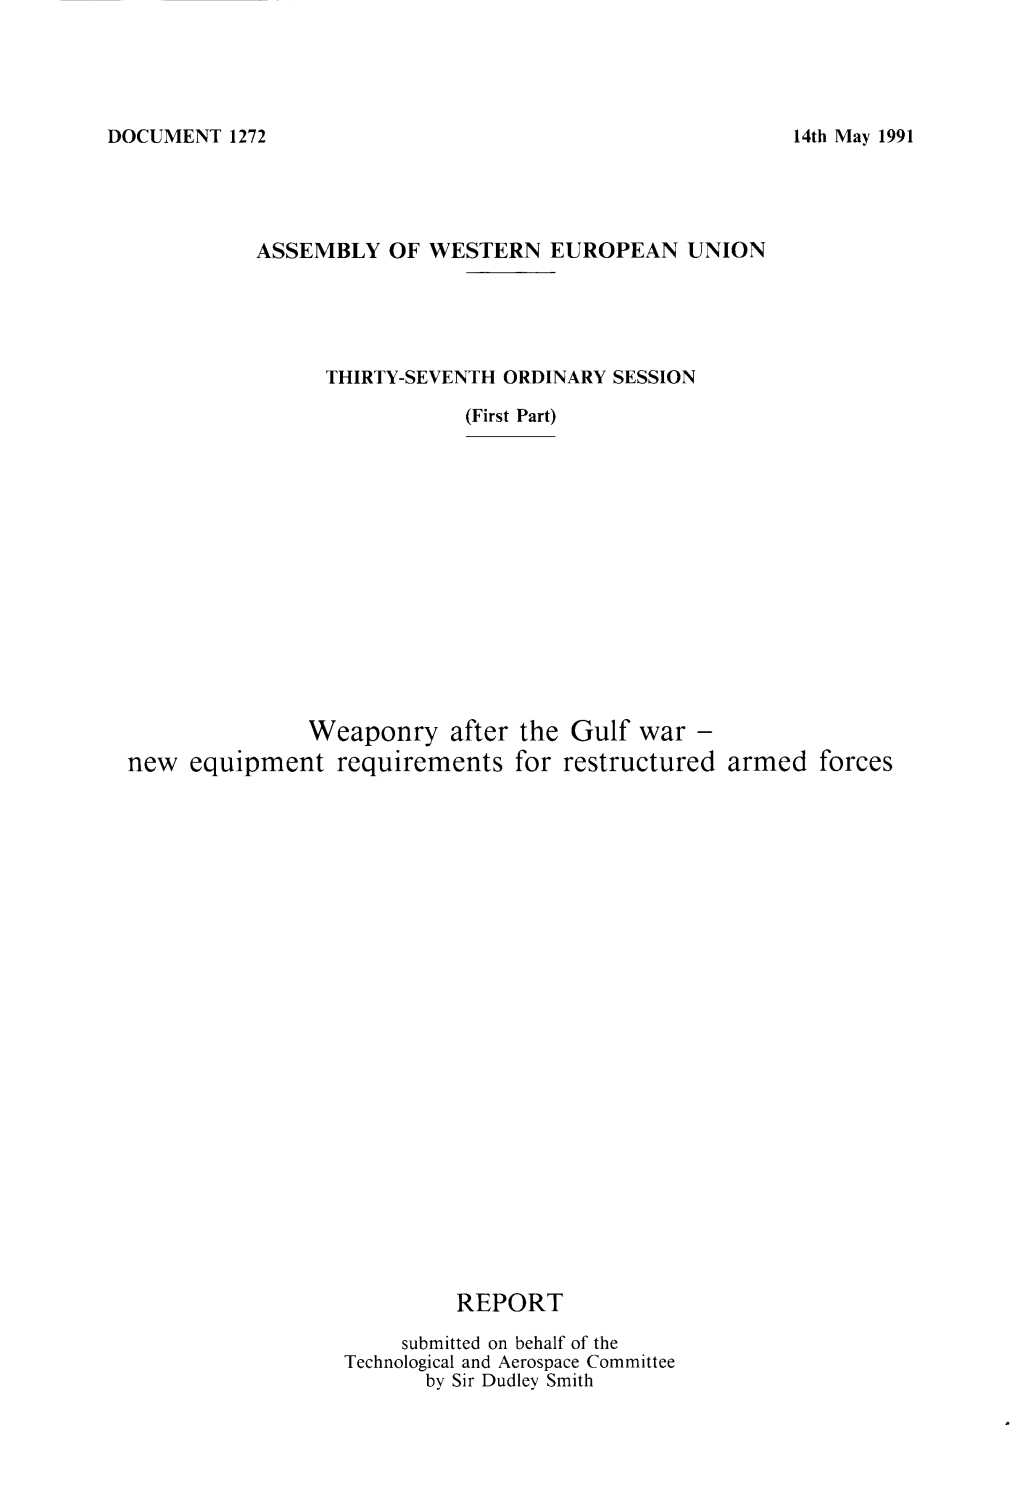 Weaponry After the Gulf War - New Equipment Requirements for Restructured Armed Forces